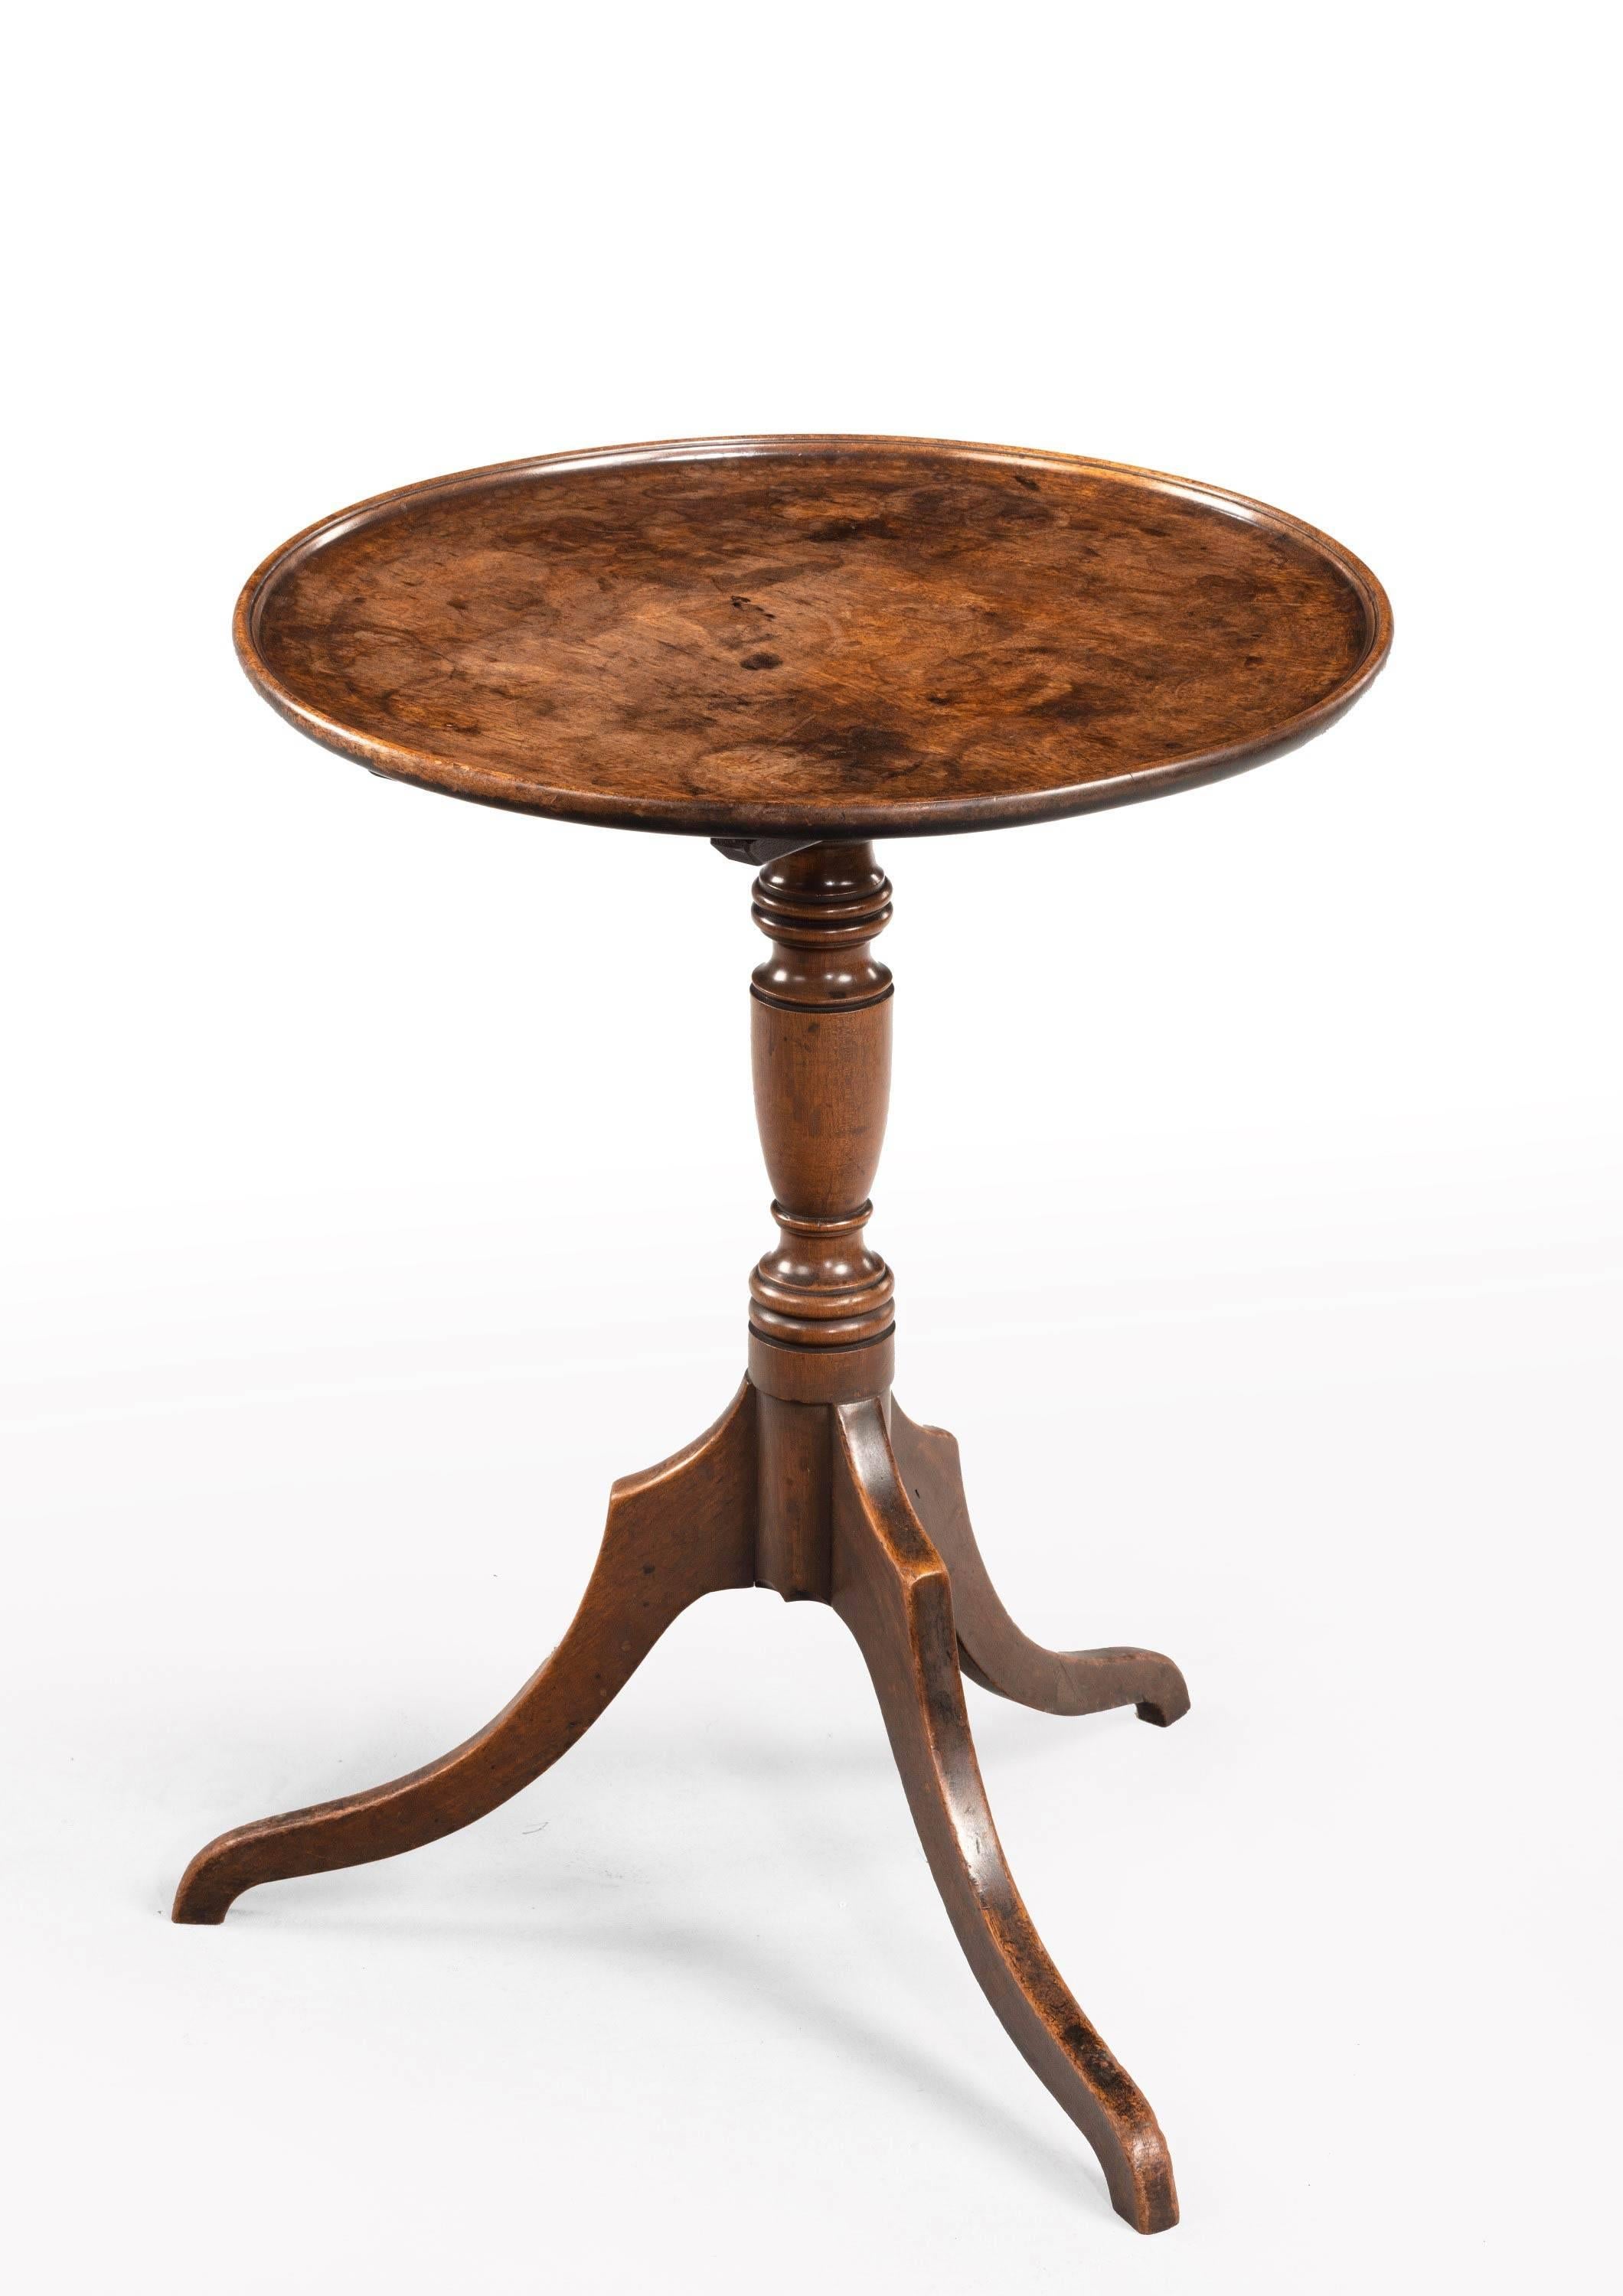 George III Period Mahogany Tilt Table In Good Condition In Peterborough, Northamptonshire